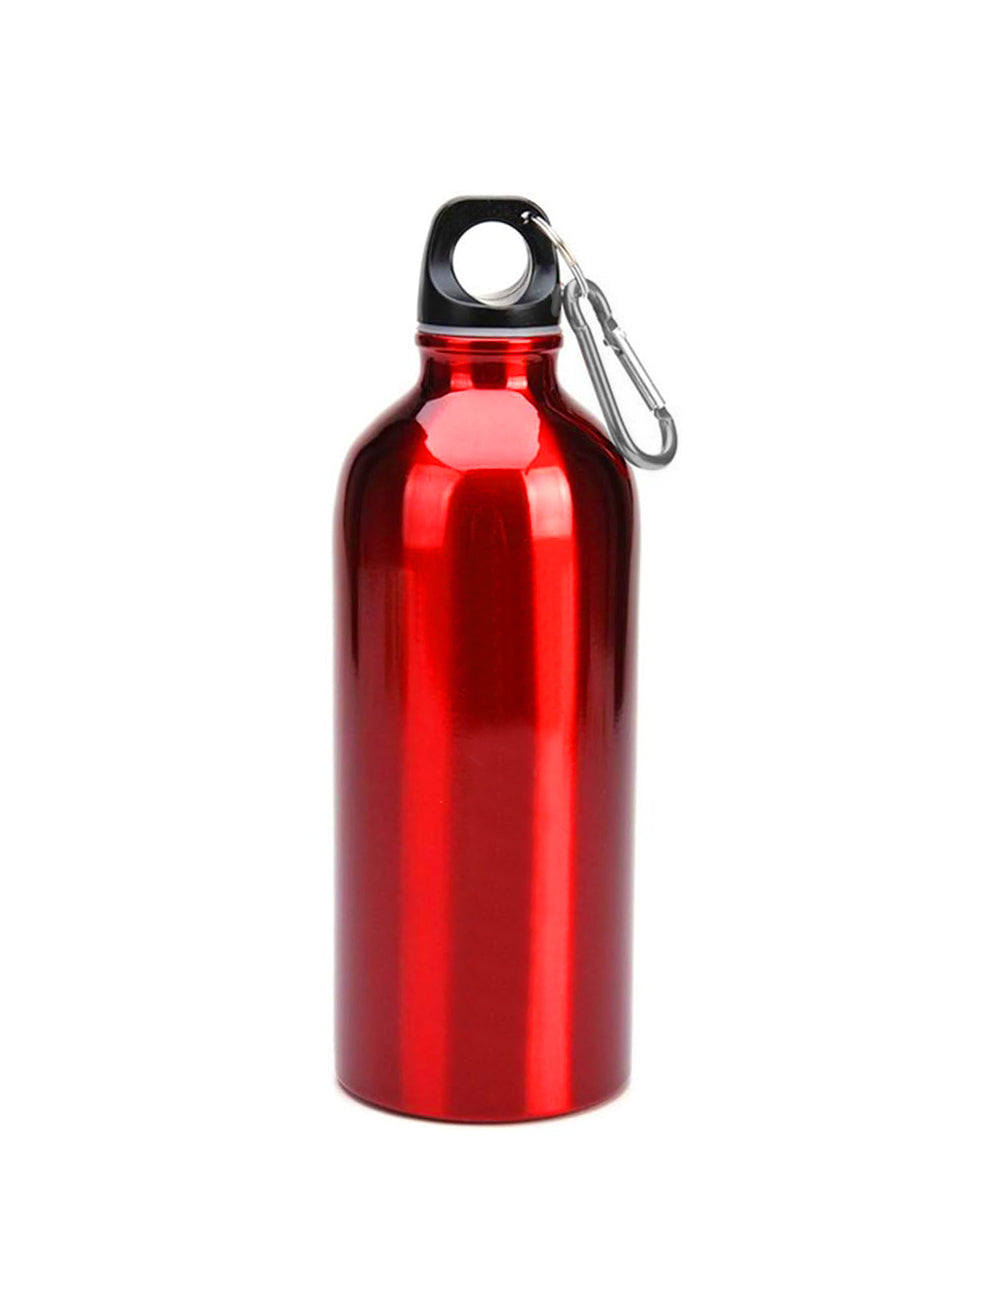 600ml Single Wall Stainless Steel Water Bottle with Carabiner Clip FX-8848